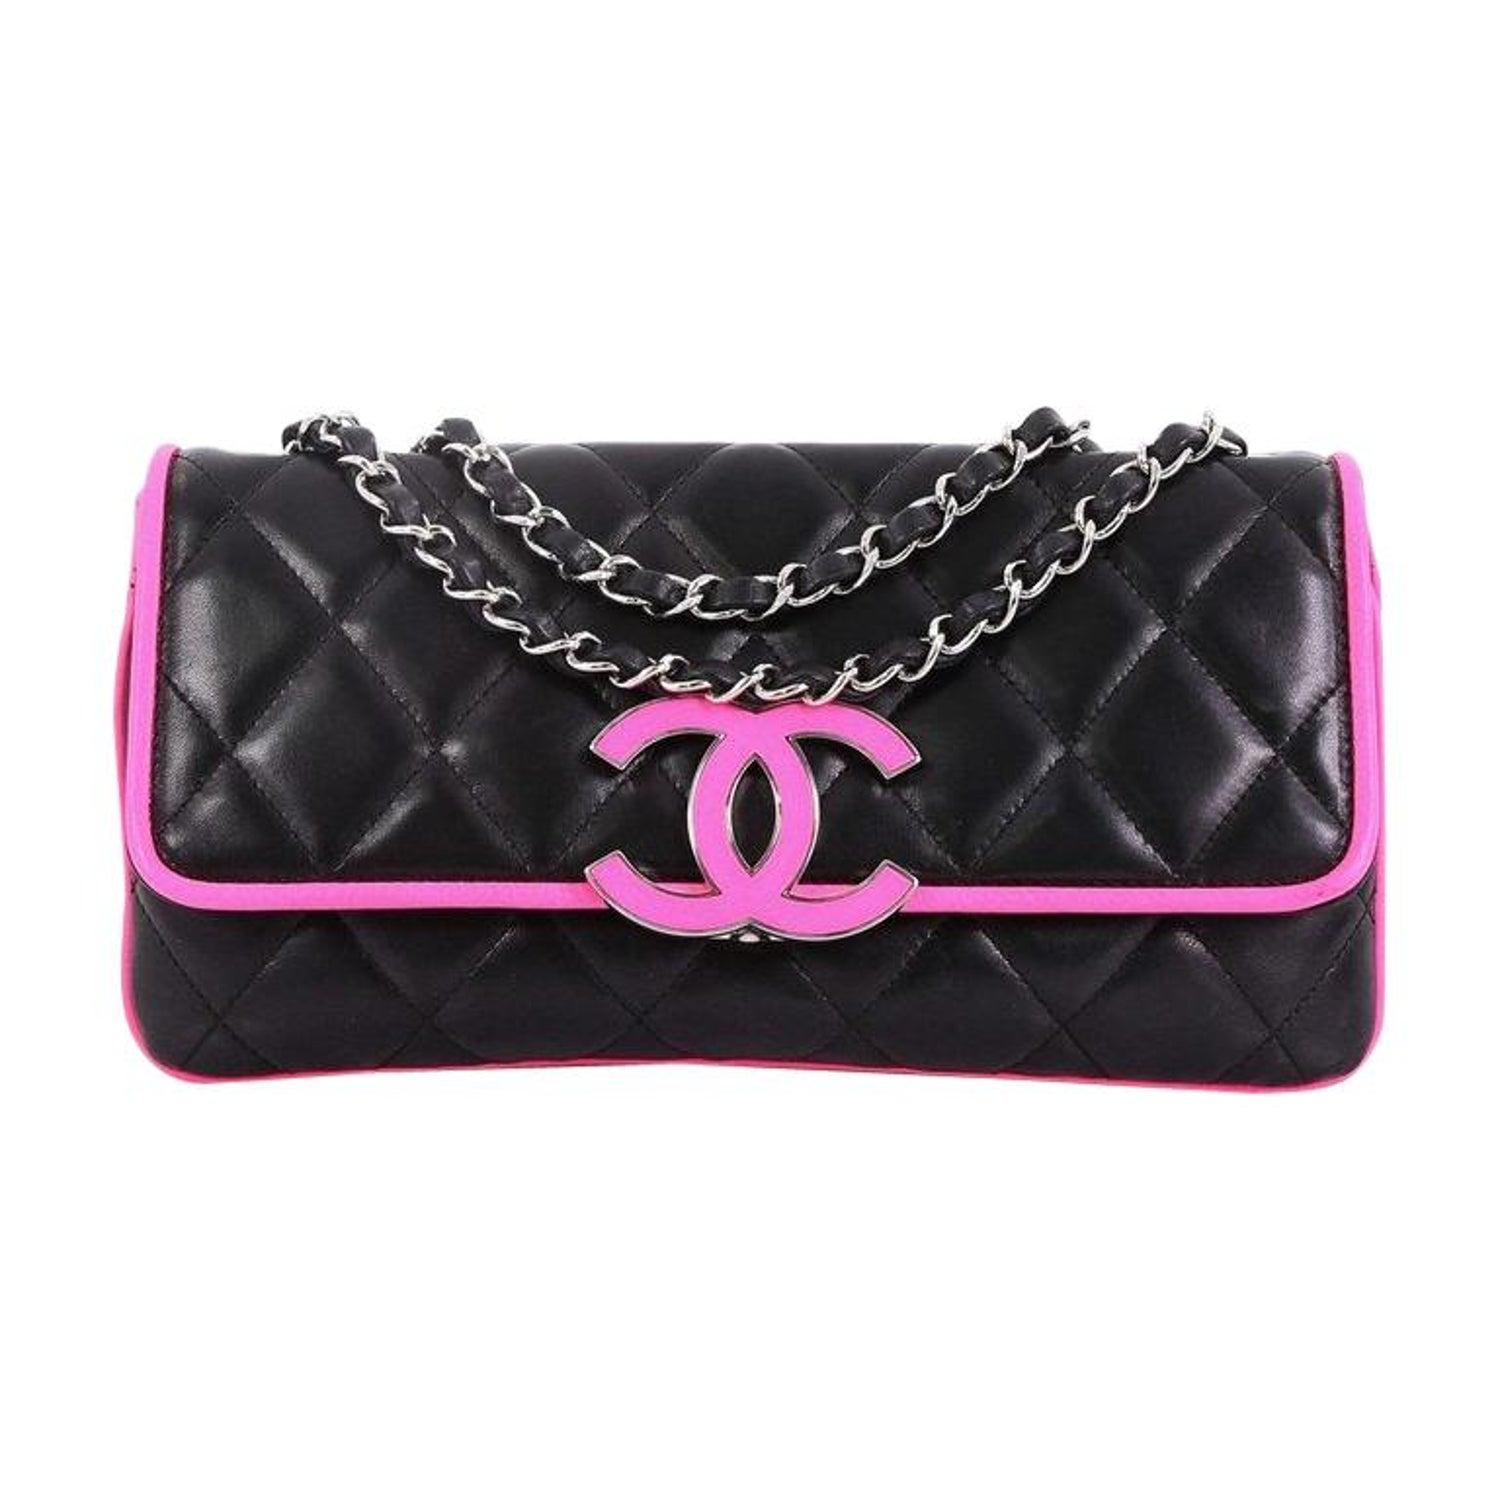 Chanel 2008 Cruise Black Pink Small Medium Logo Accordion Classic Flap Bag  For Sale 6